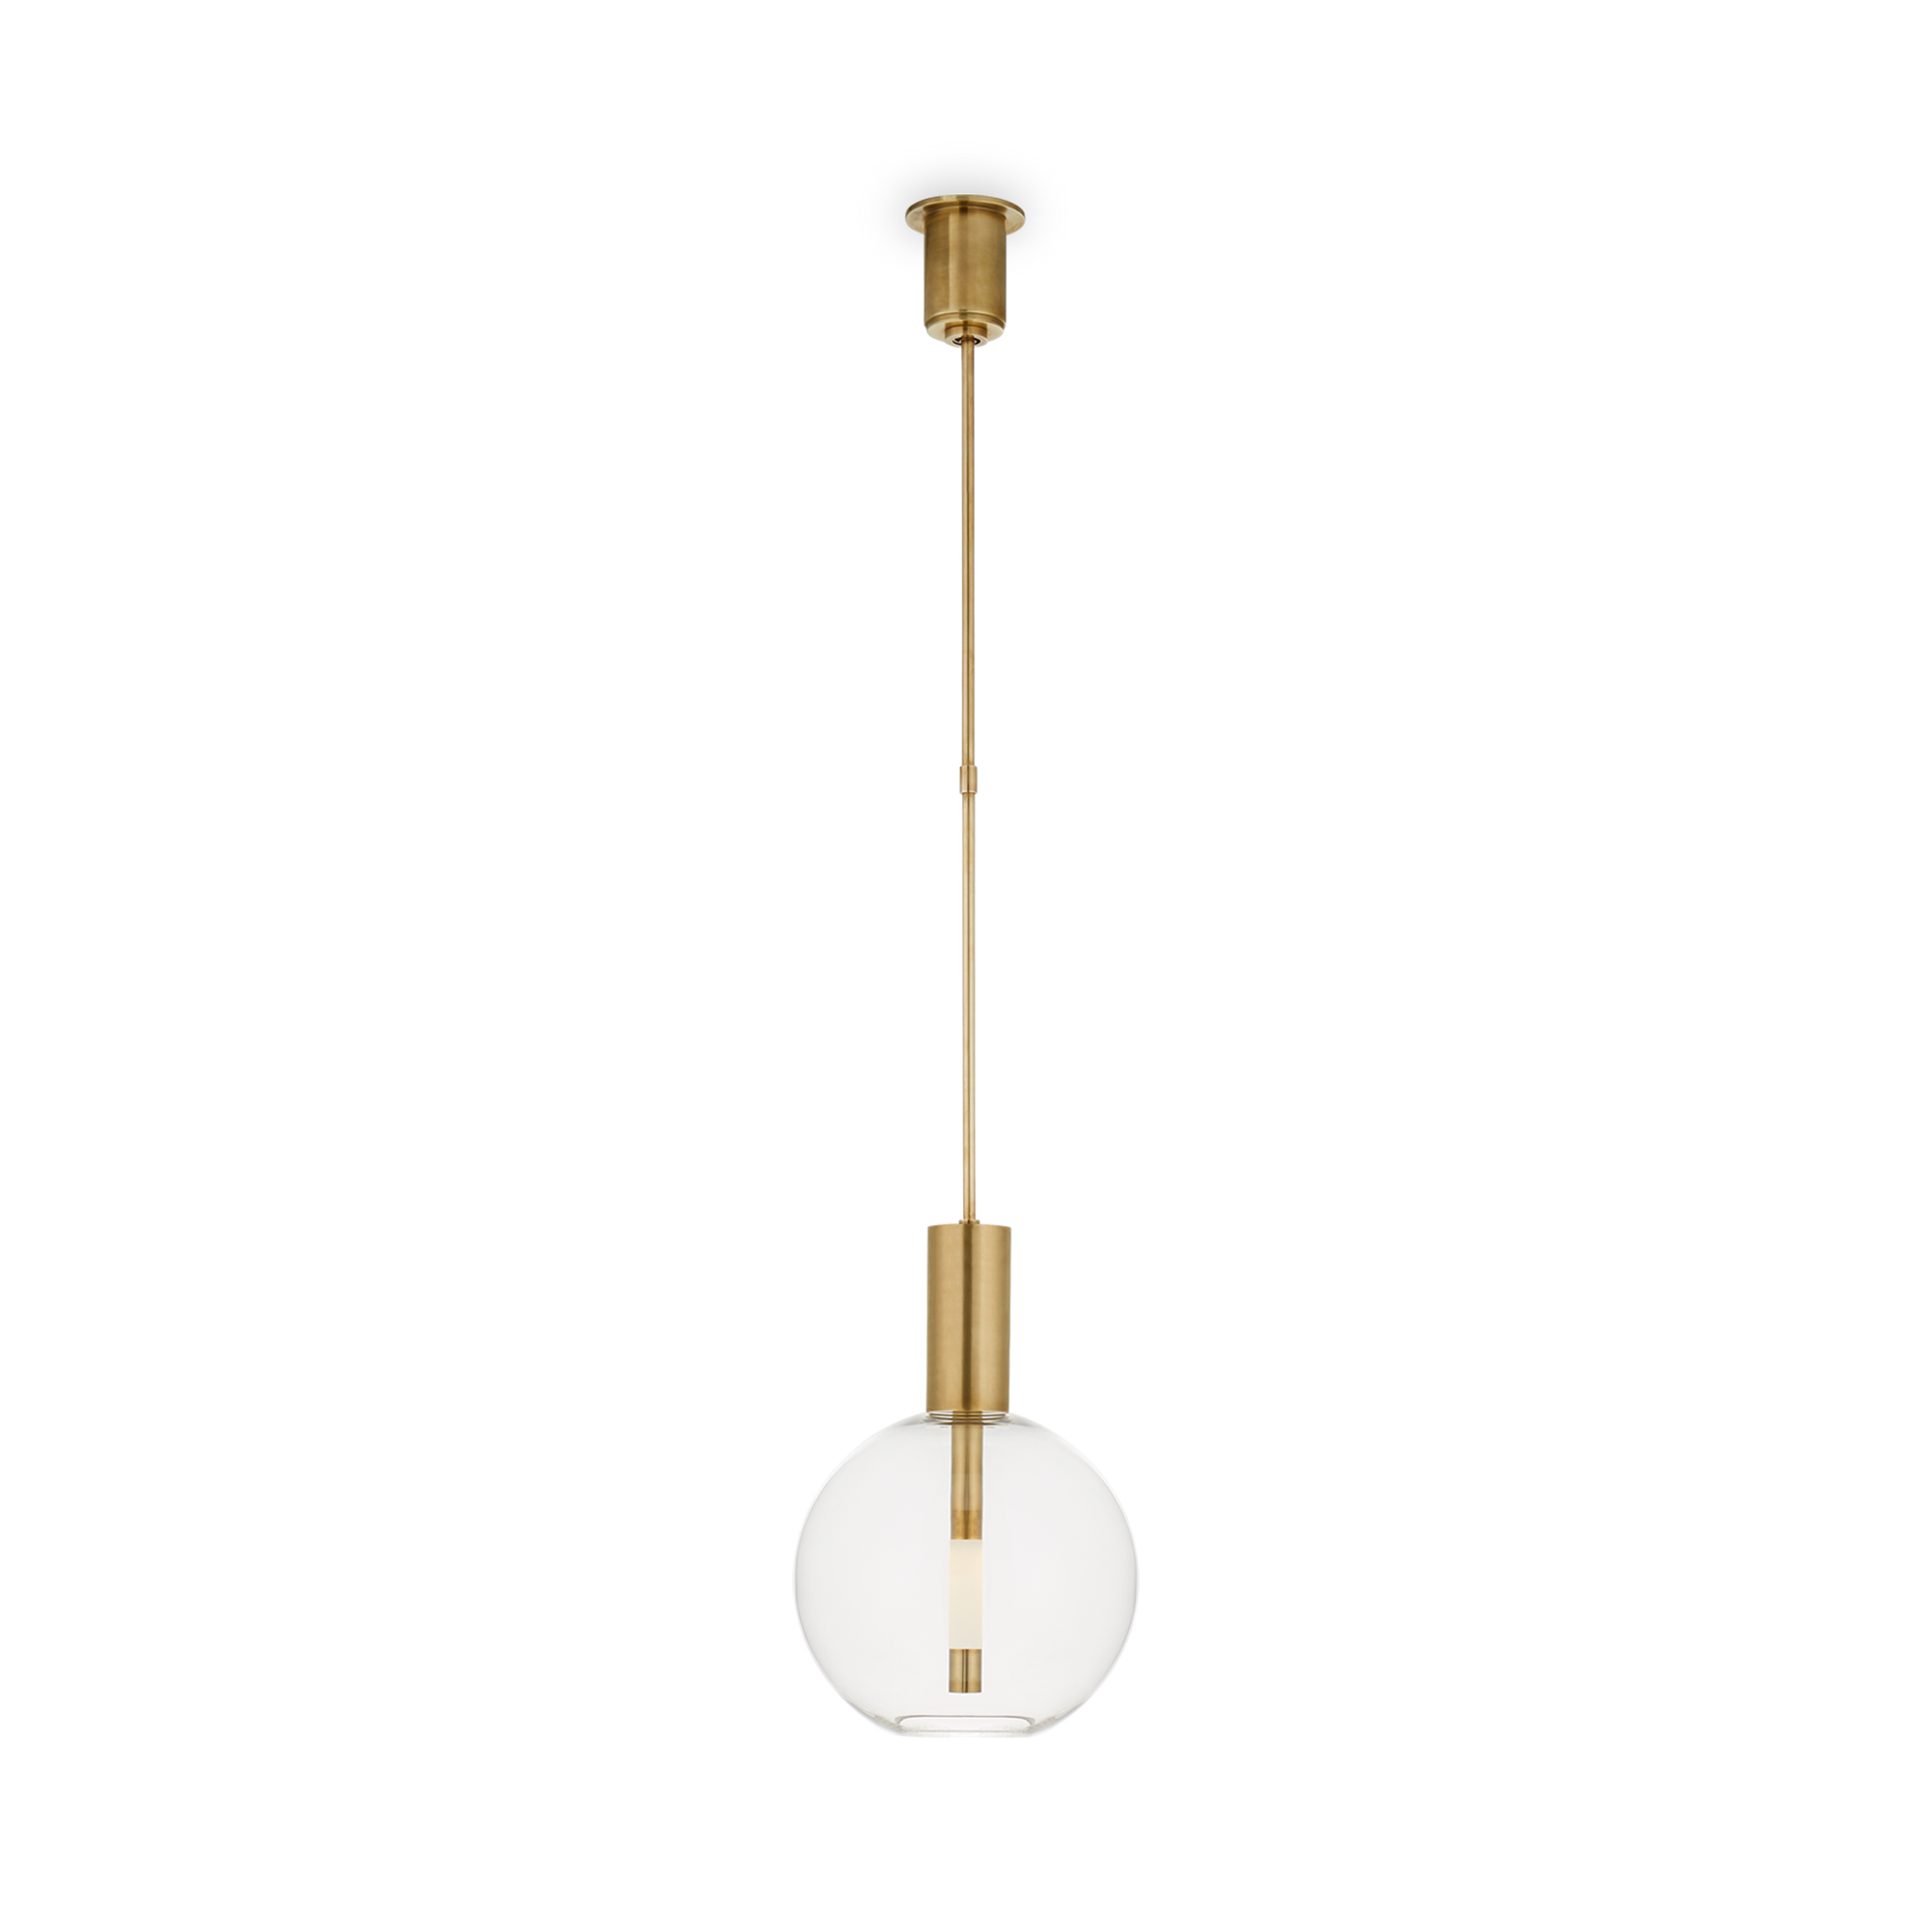 The Nye Globe Pendant features a distinctive design and soulful vibe.